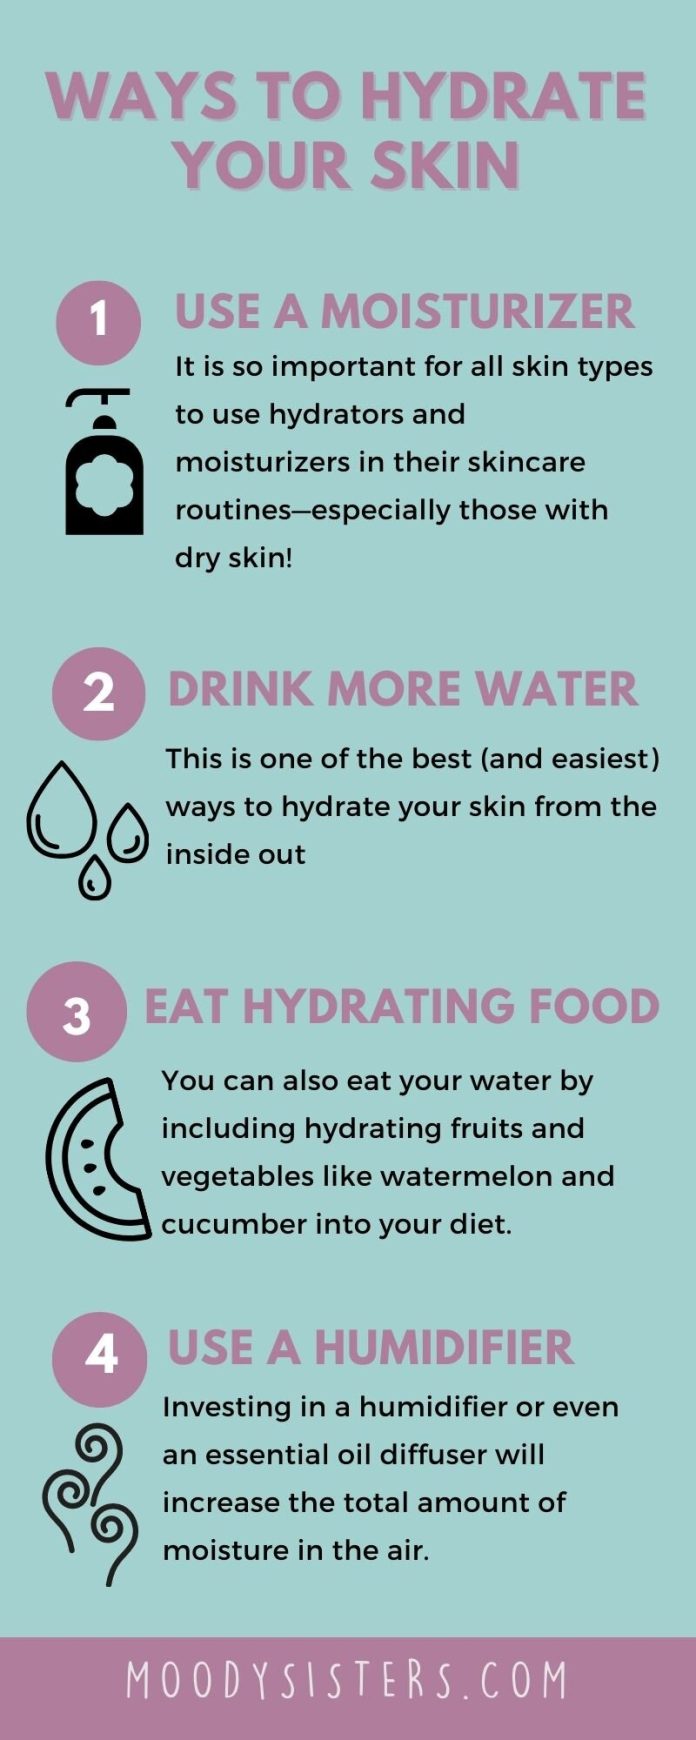 How Do You Hydrate Your Skin